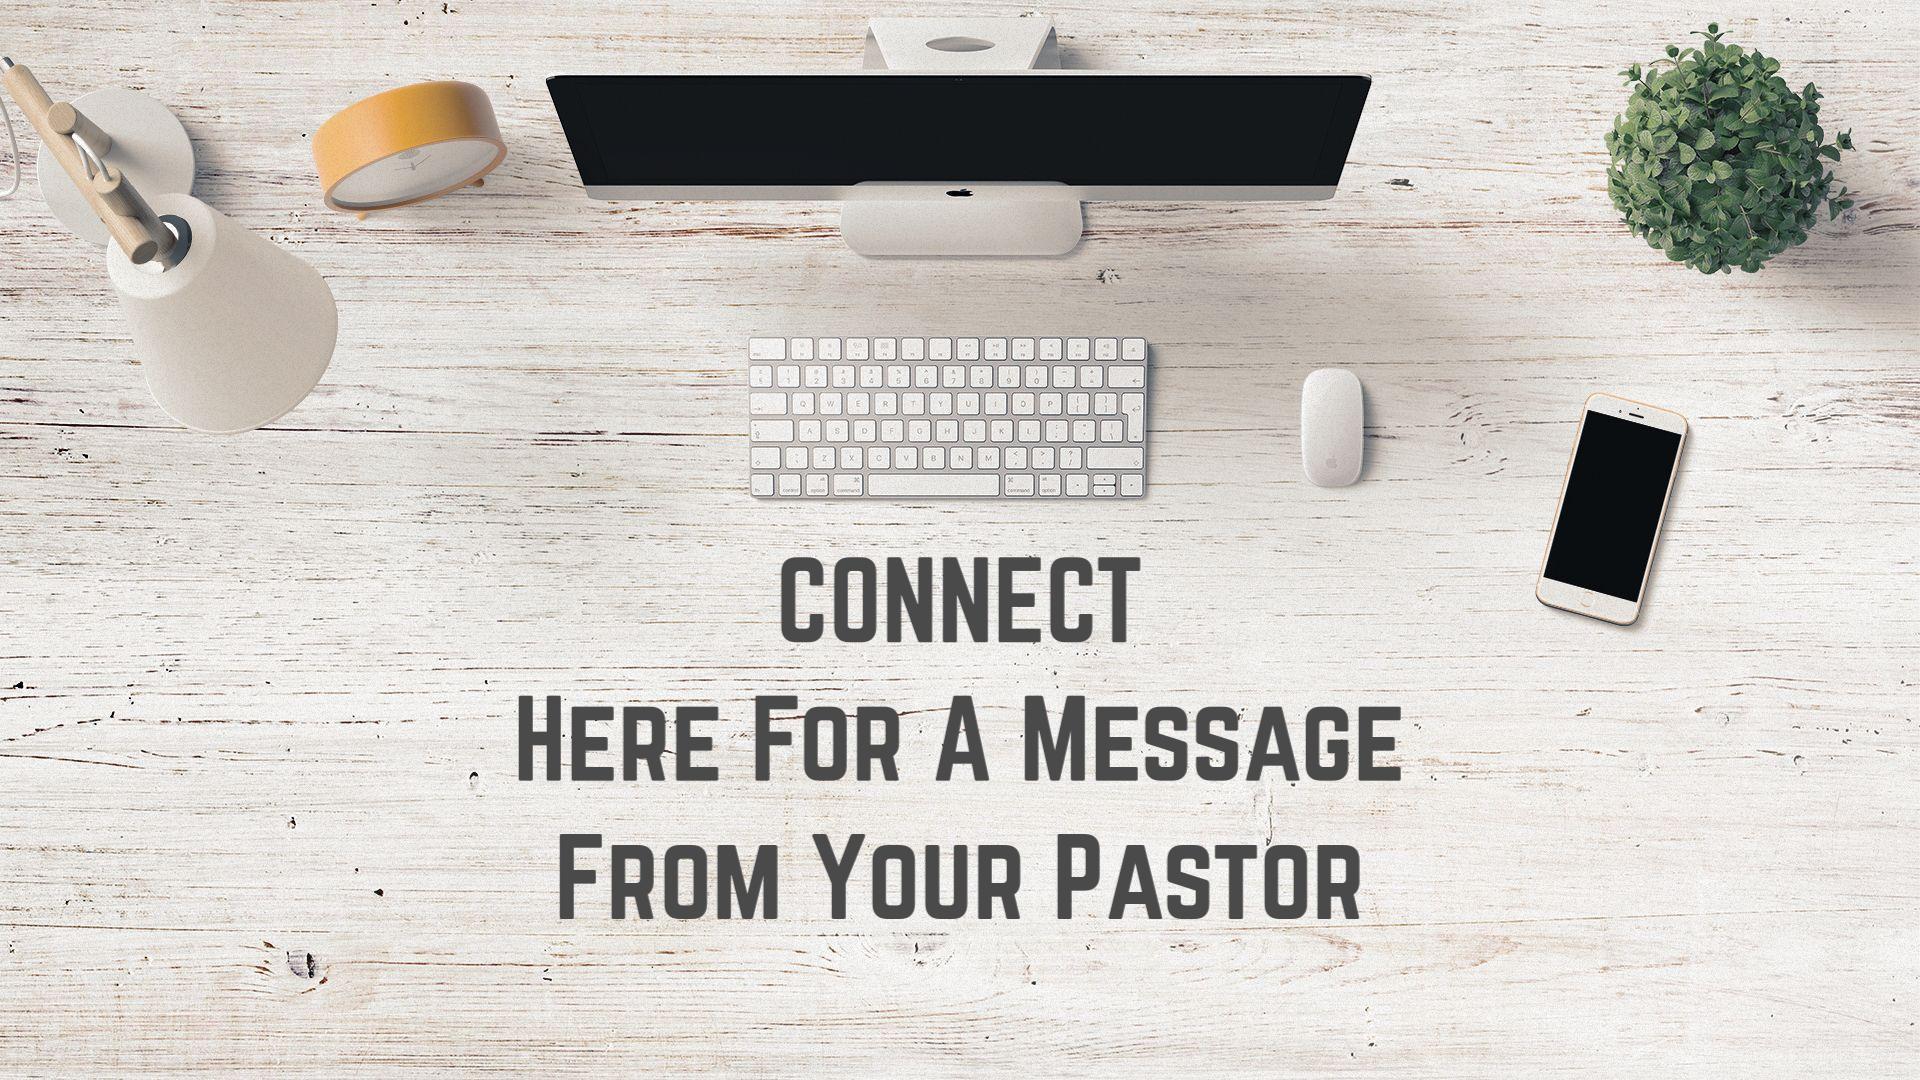 message from pastor